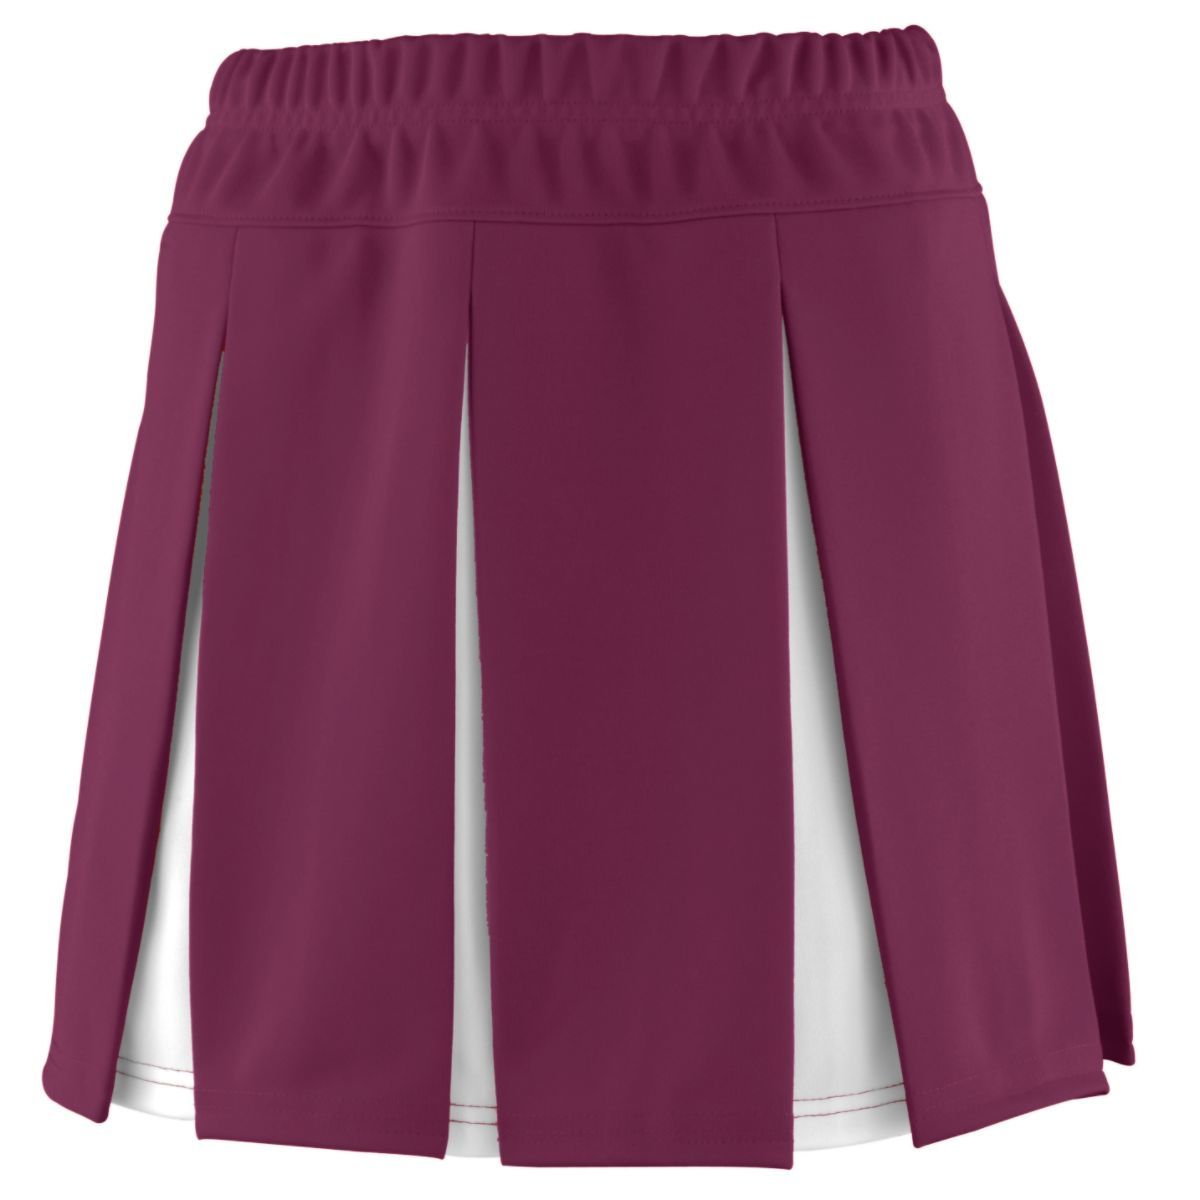 Augusta Sportswear Girls Liberty Skirt in Maroon/White  -Part of the Girls, Augusta-Products, Cheer product lines at KanaleyCreations.com